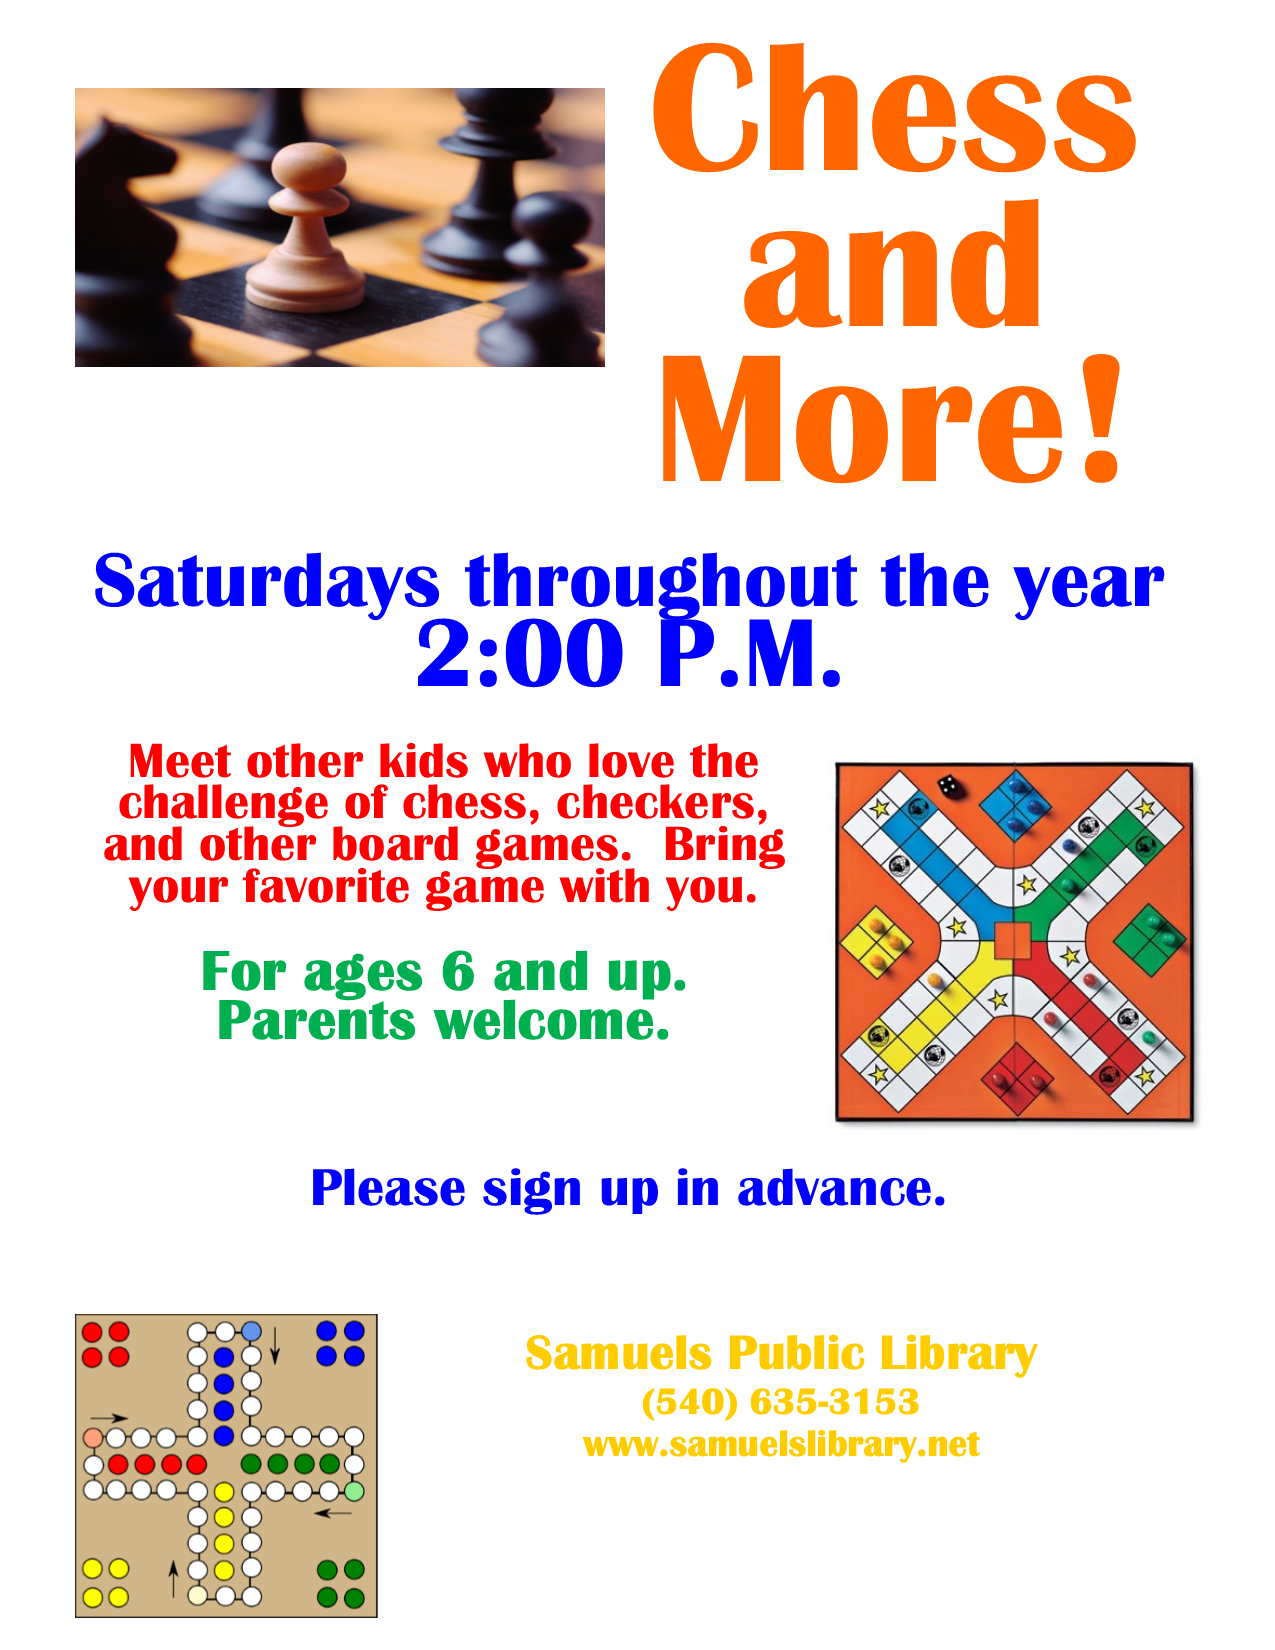 Chess and More for ages 6 and up.